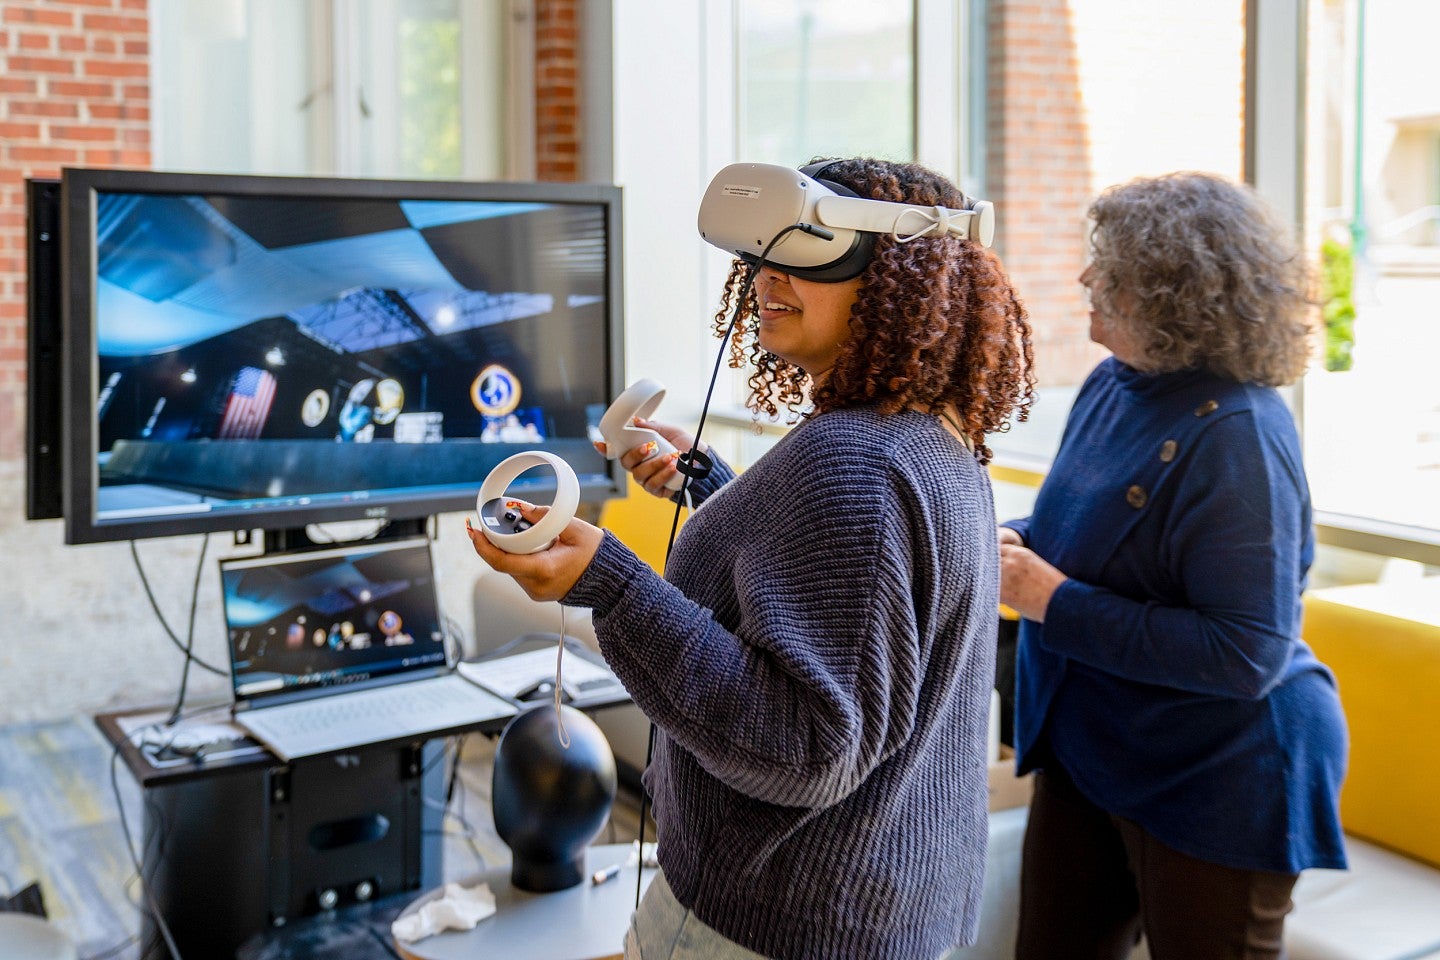 a student uses a VR headset in front of a screen showing the metaverse while Donna Davis looks on